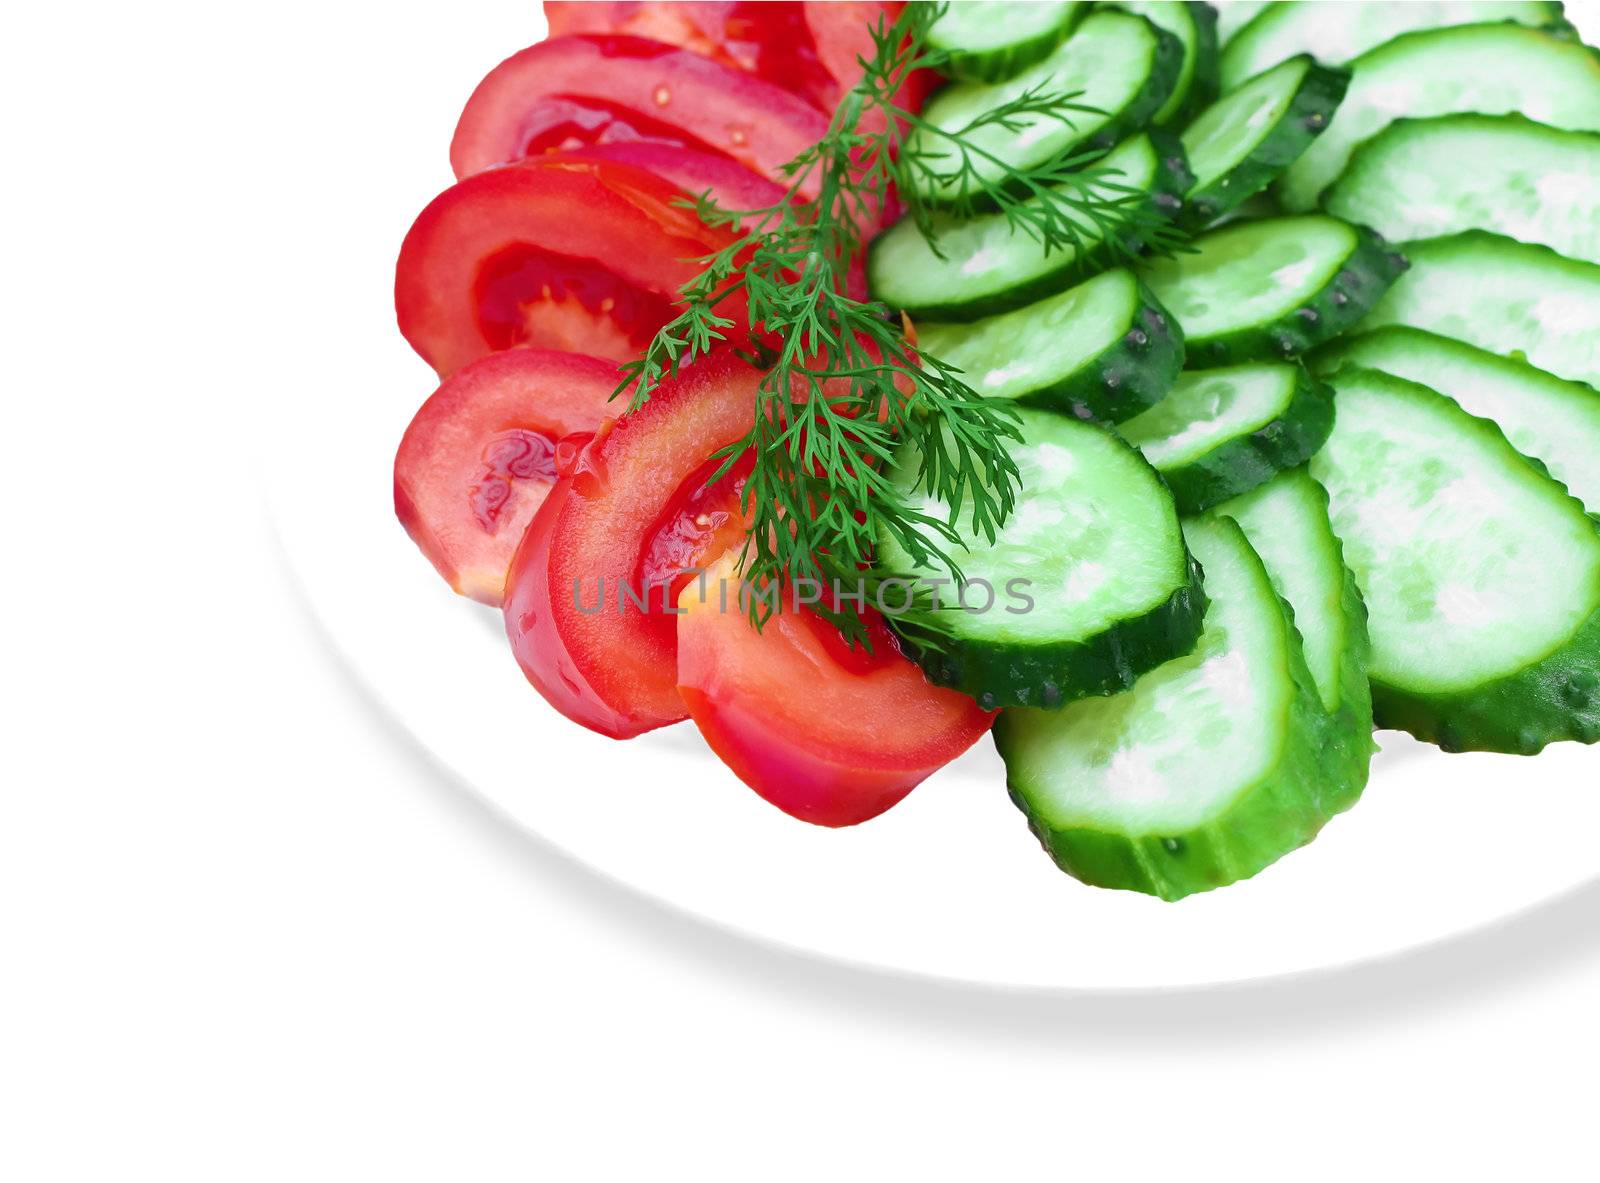 Tomato and cucumber with dill on a plate by NickNick